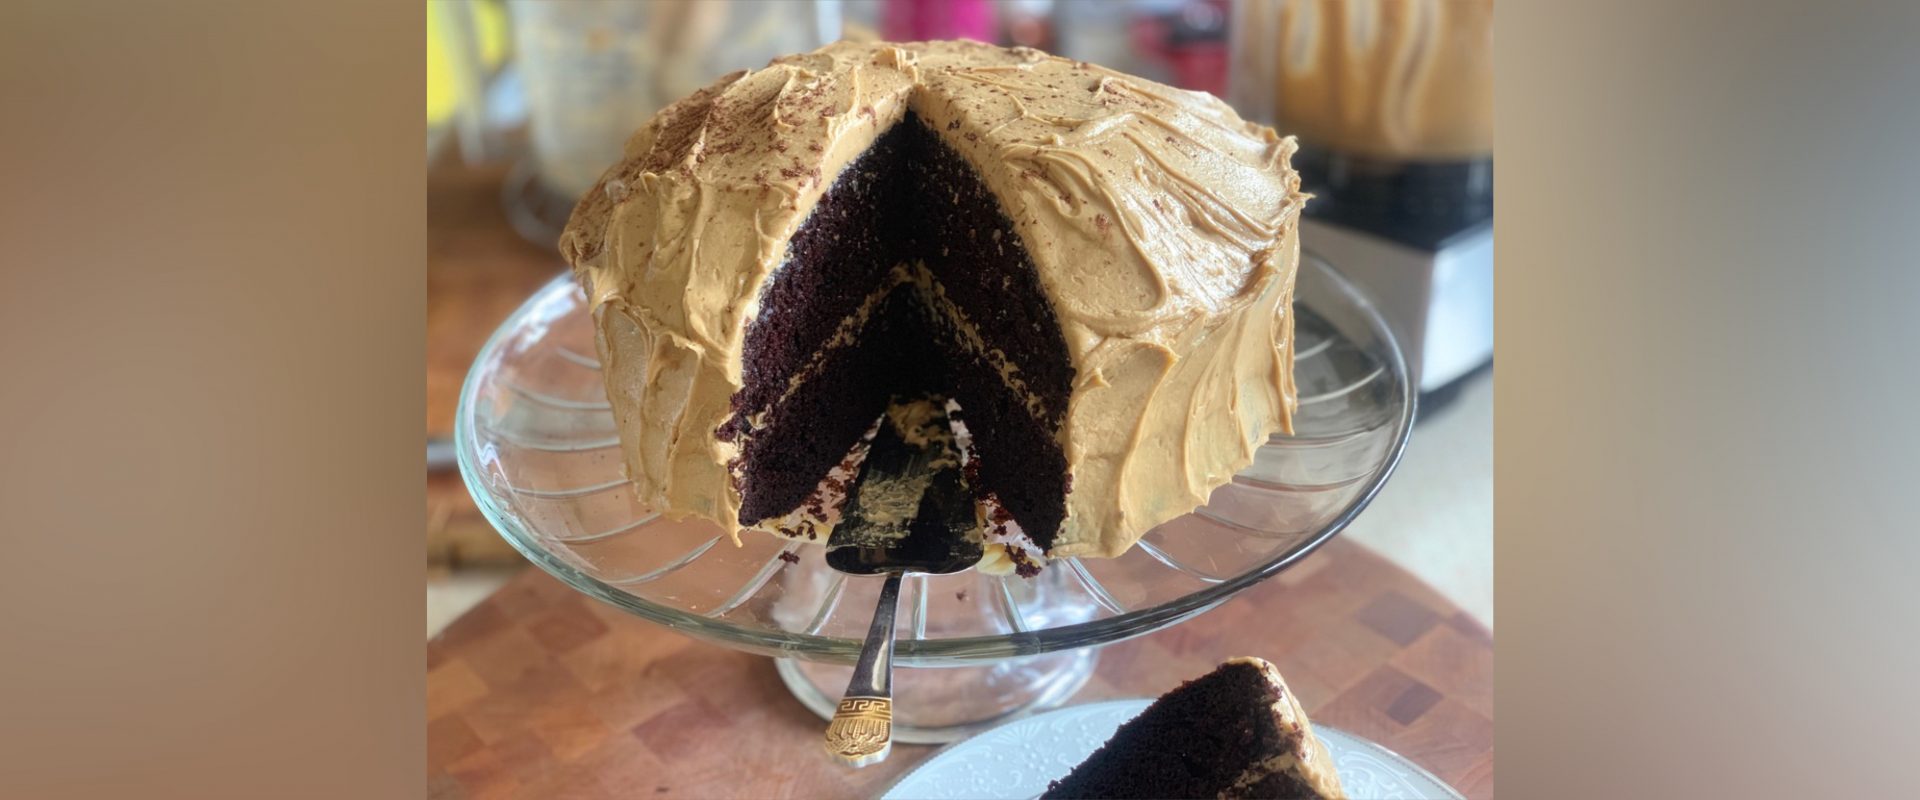 Permalink to: Chocolate Cake with Coffee Buttercream